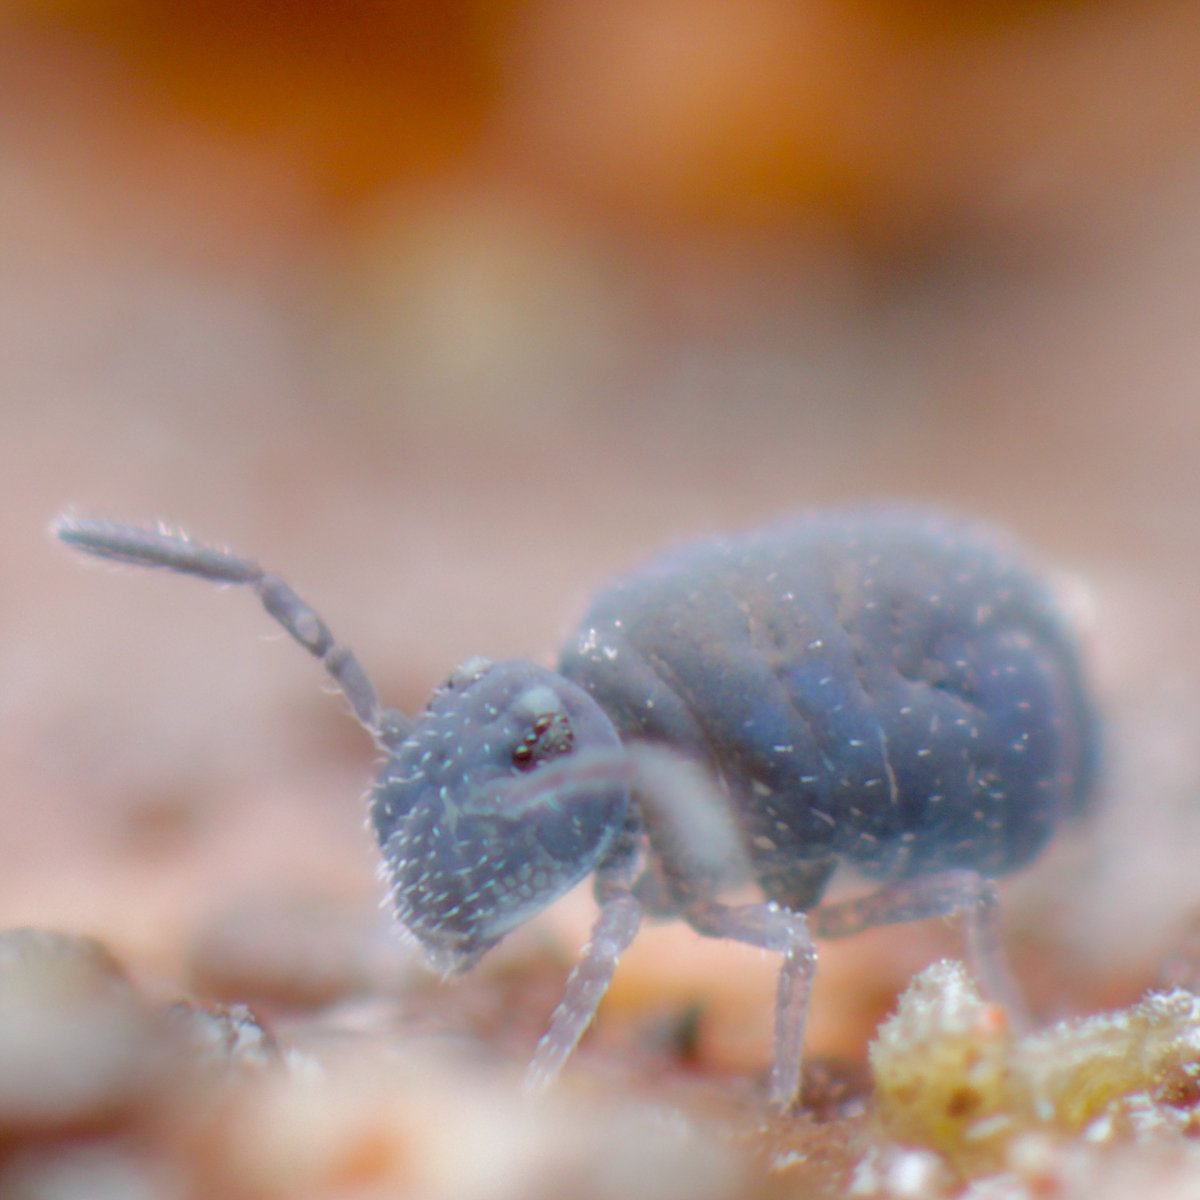 As a huge fan of anthropomorphism, this springtail, (probably a juvenile Sminthurinus niger) looks plaintive and pensive. Will accept other emotional suggestions... #springtail #collembola #soilanimal chaosofdelight.org